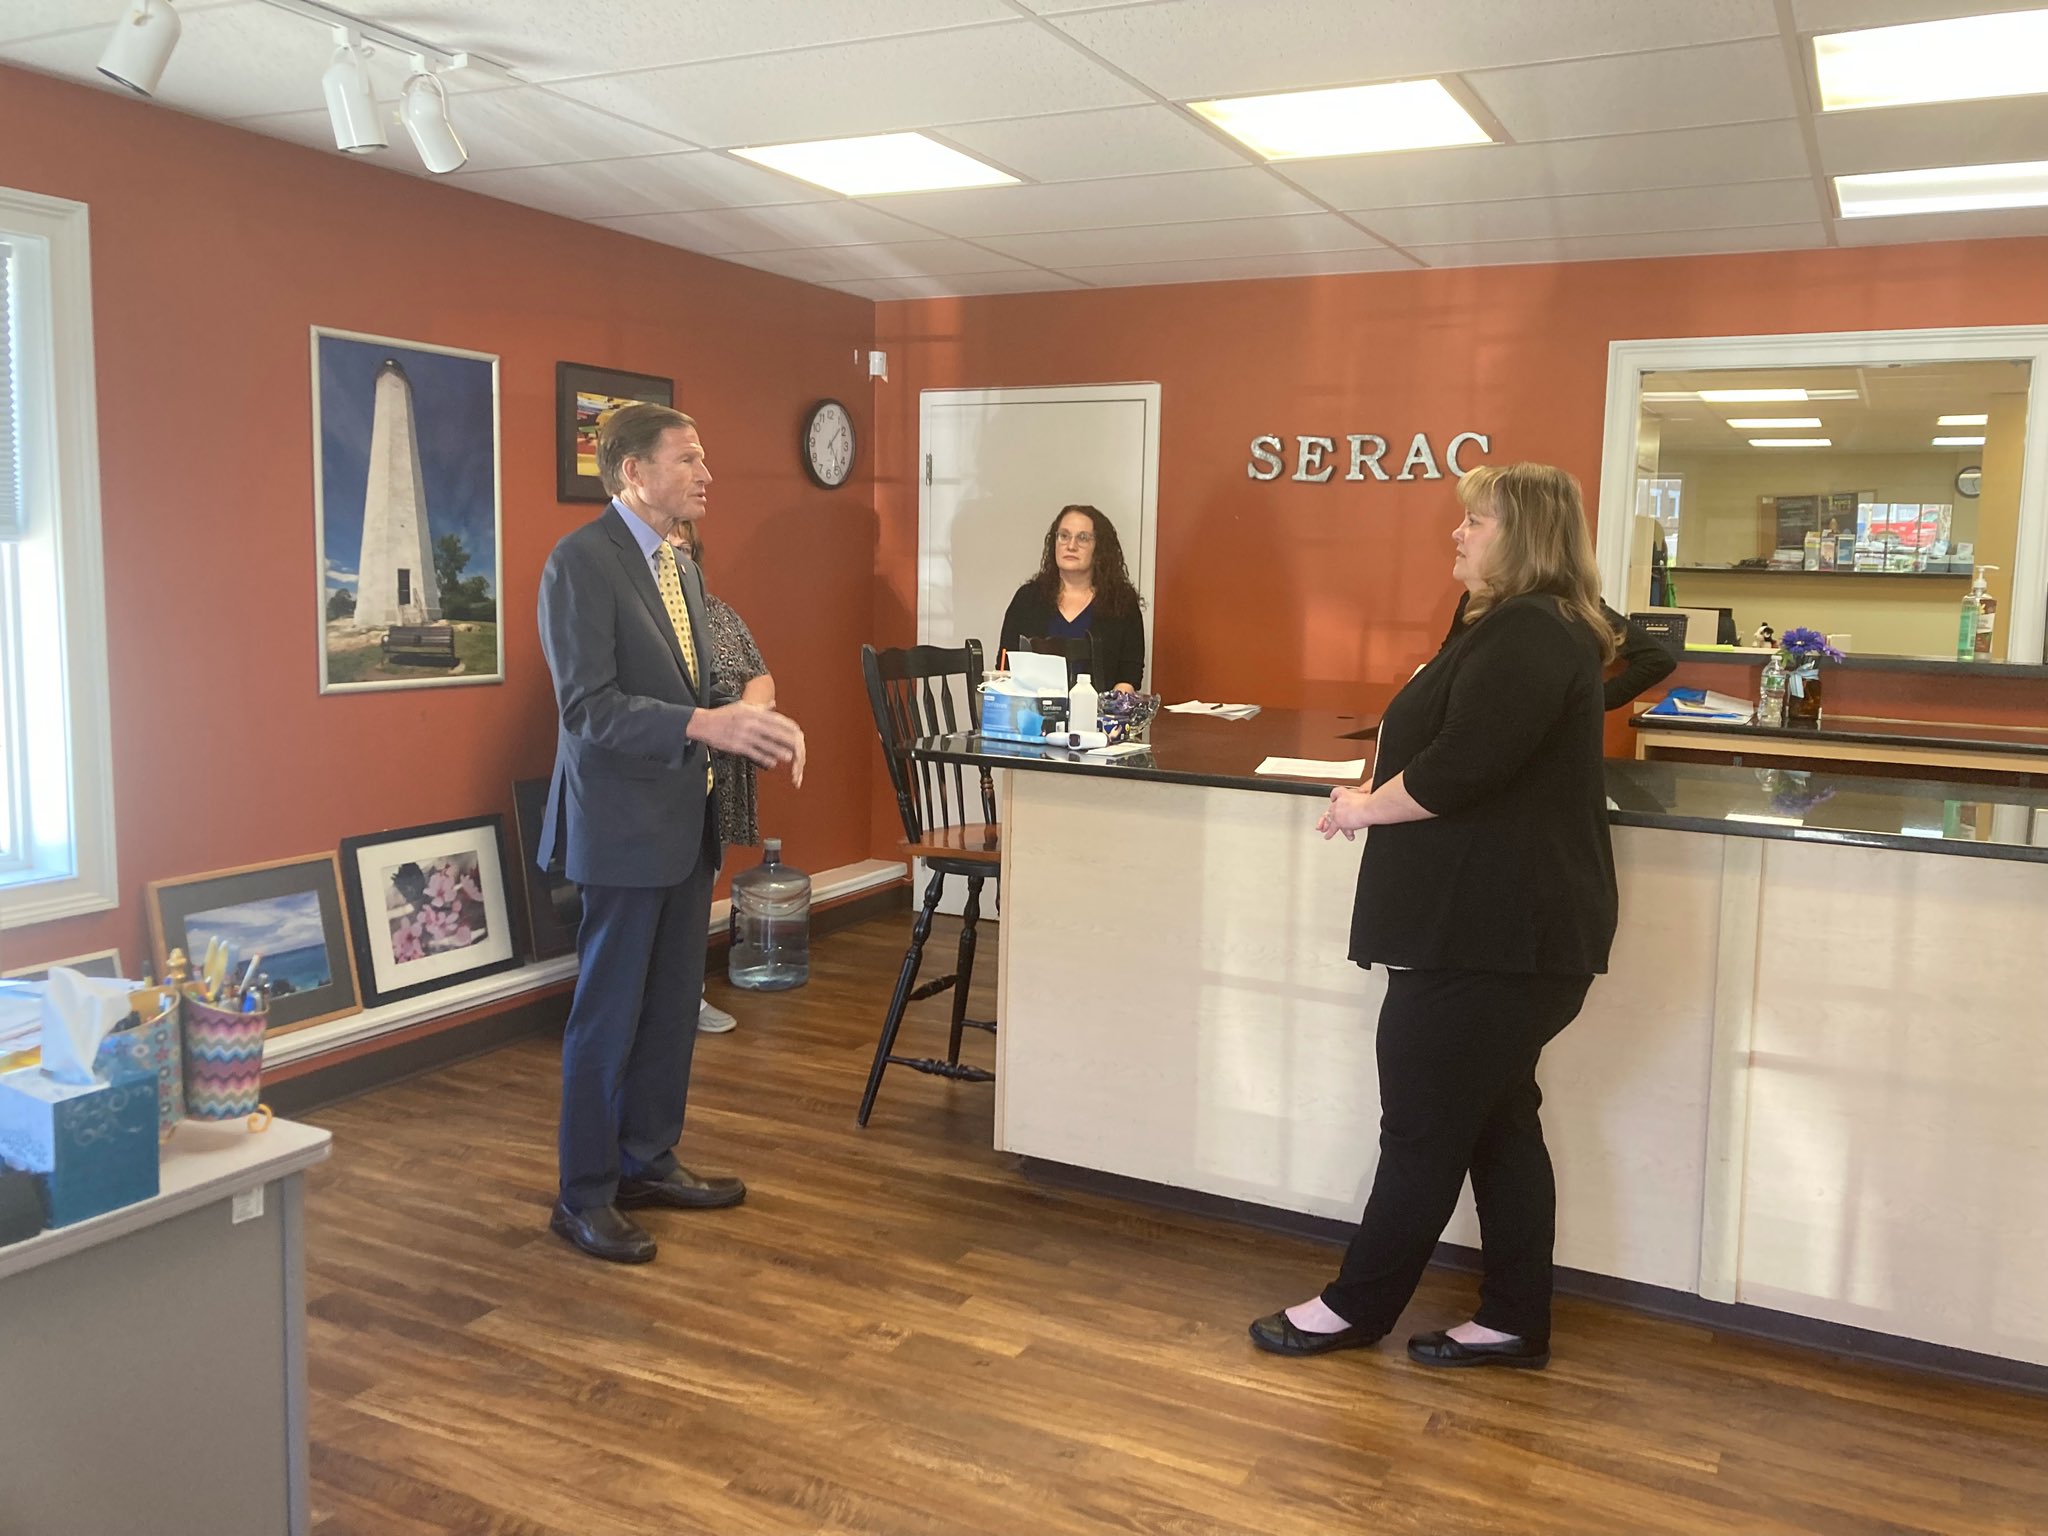 U.S. Senator Richard Blumenthal (D-CT) announced $200,000 in funding for the Southeastern Regional Action Council for three new staff member positions to provide much needed mental health and addiction services in Eastern Connecticut.